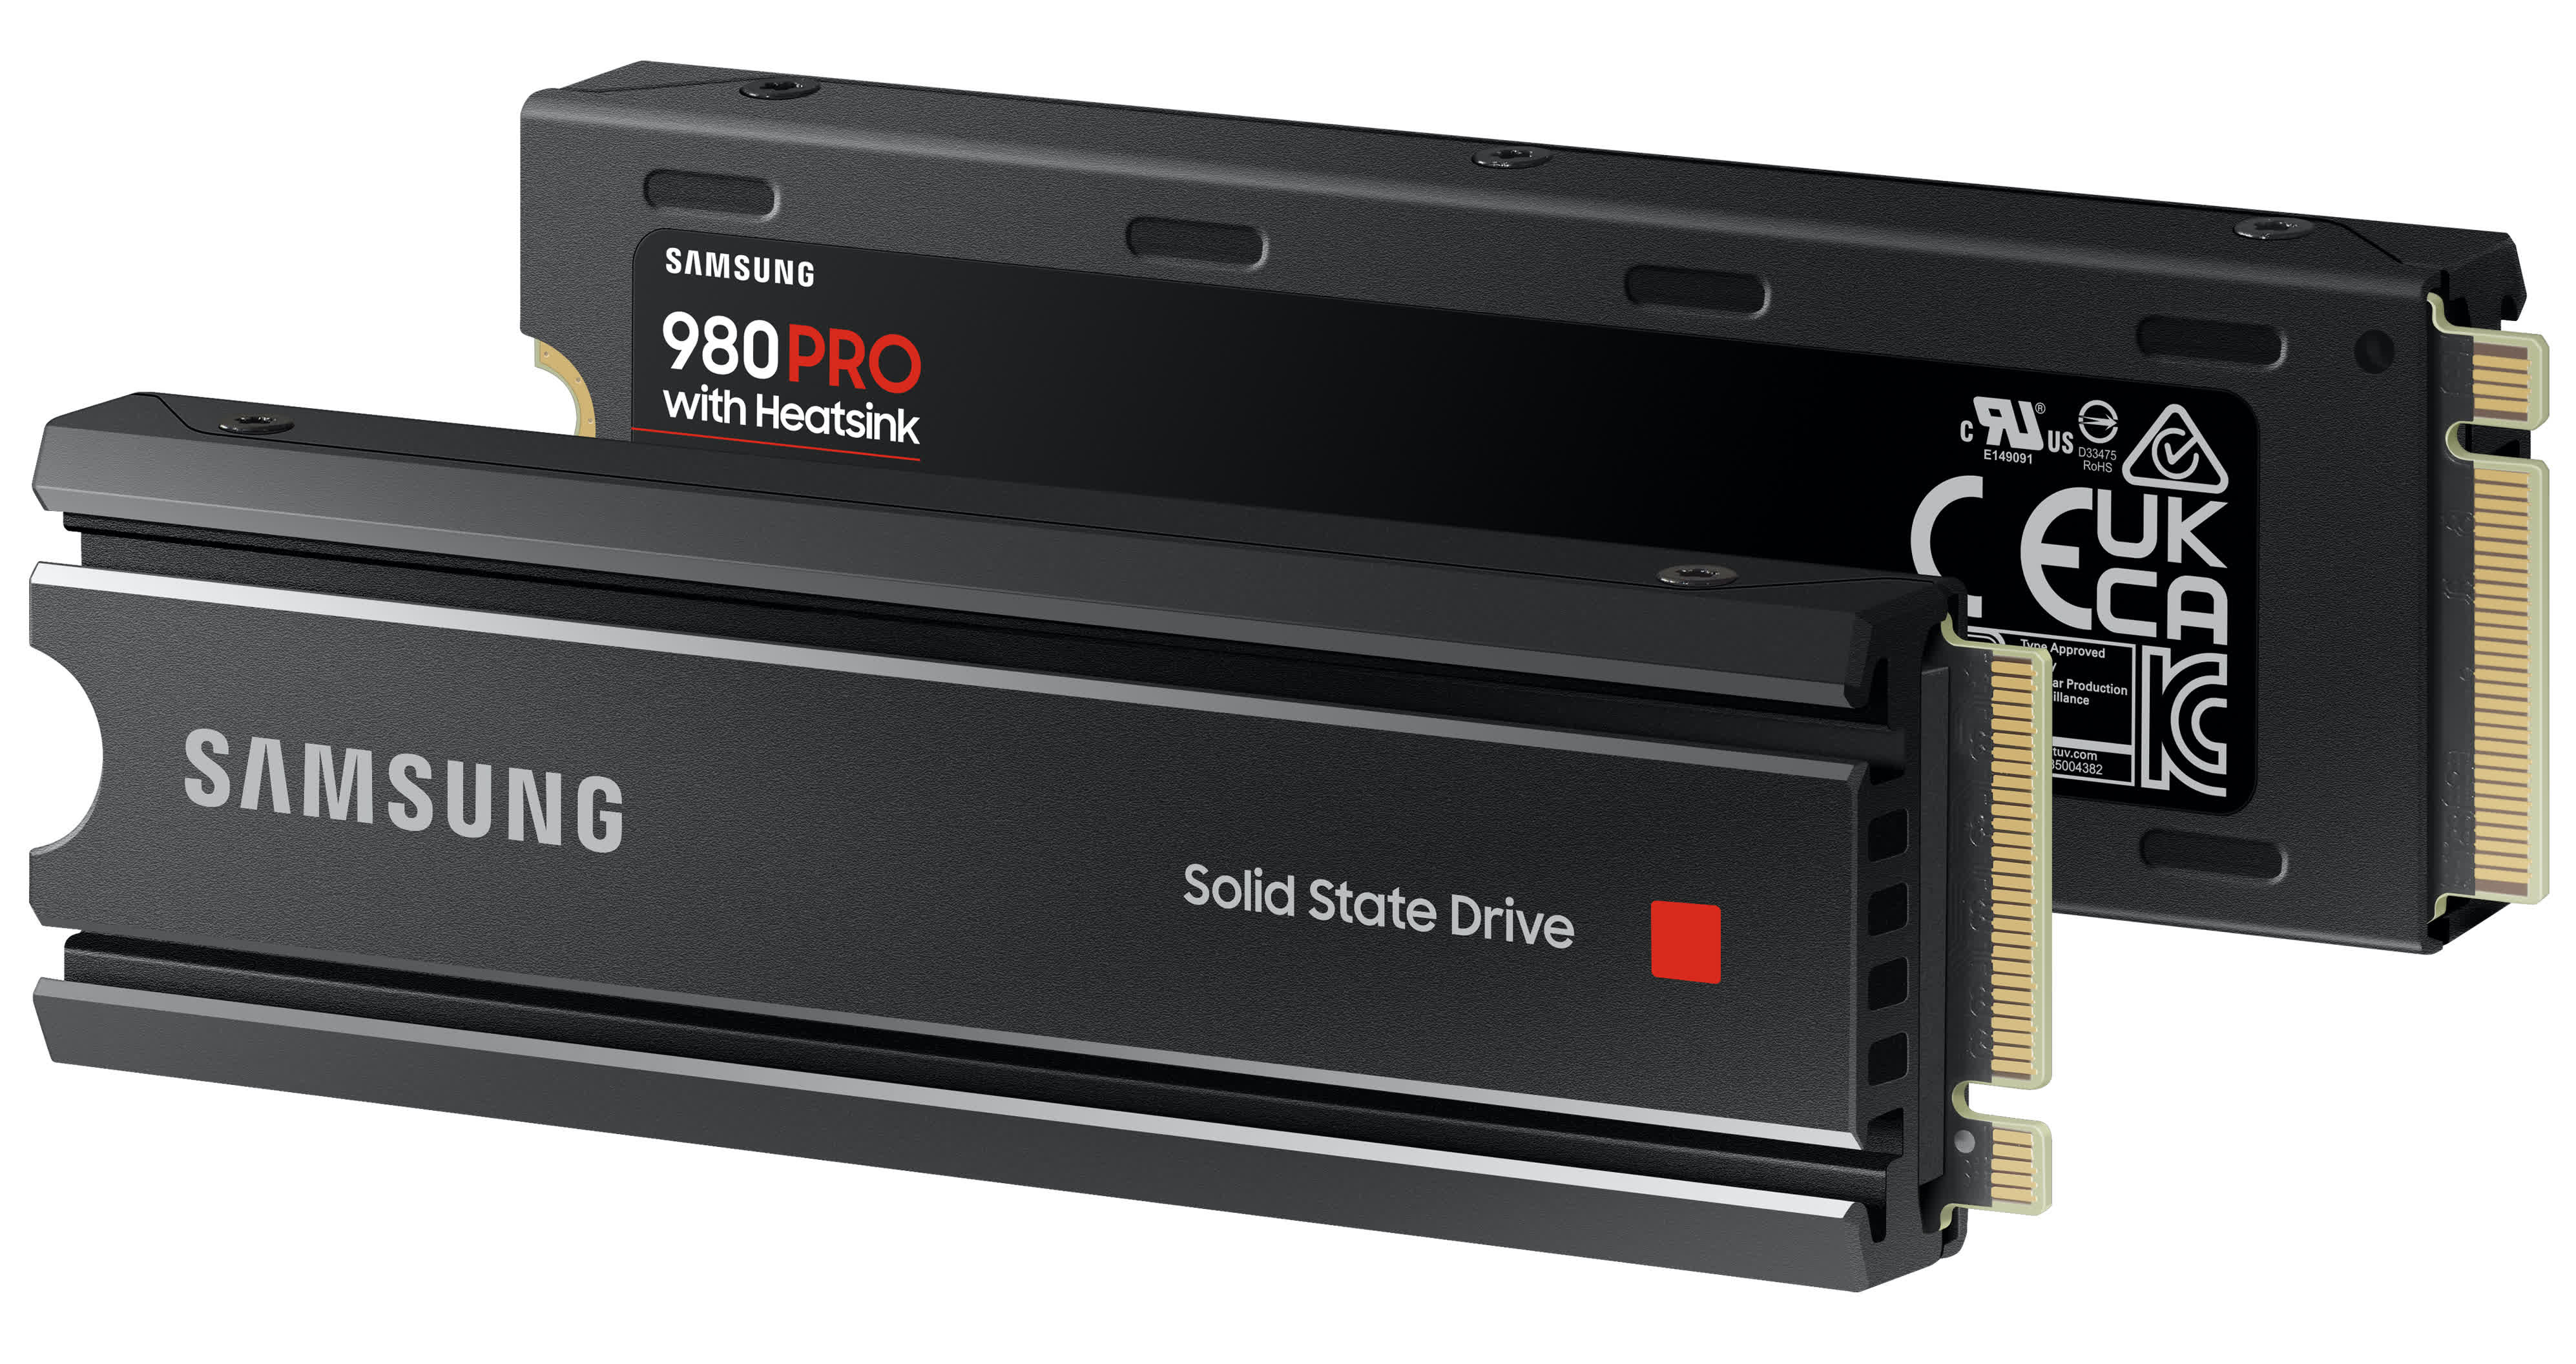 Samsung made a 980 Pro SSD specifically for PlayStation 5 owners